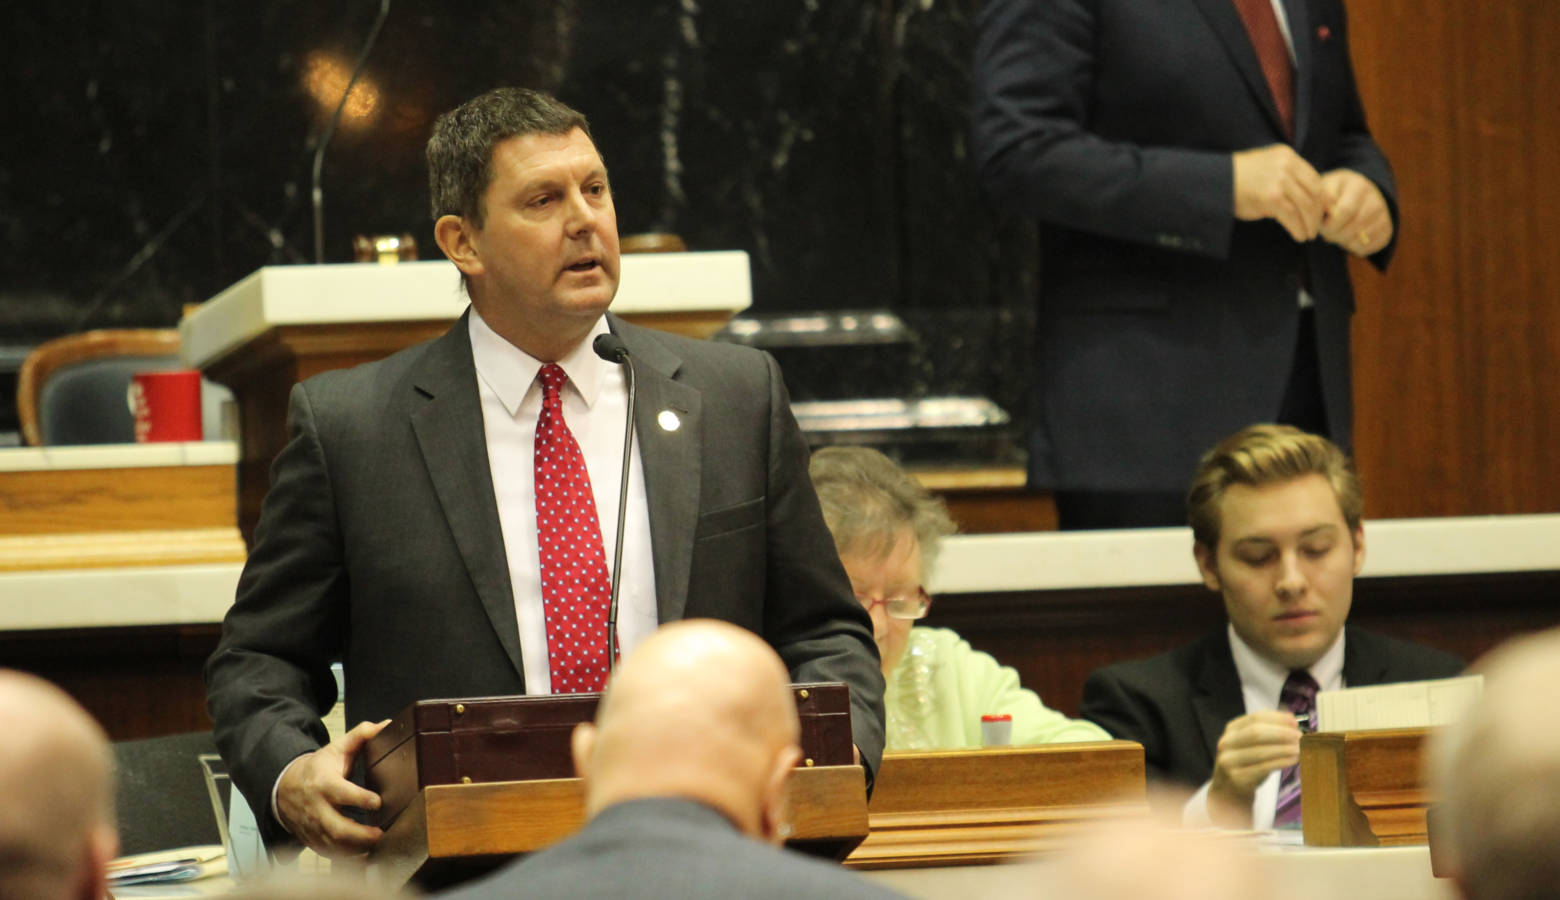 Rep. Jim Lucas (R-Seymour) says there's hypocrisy in the Indiana Chamber's position on medical marijuana. (Lauren Chapman/IPB News)